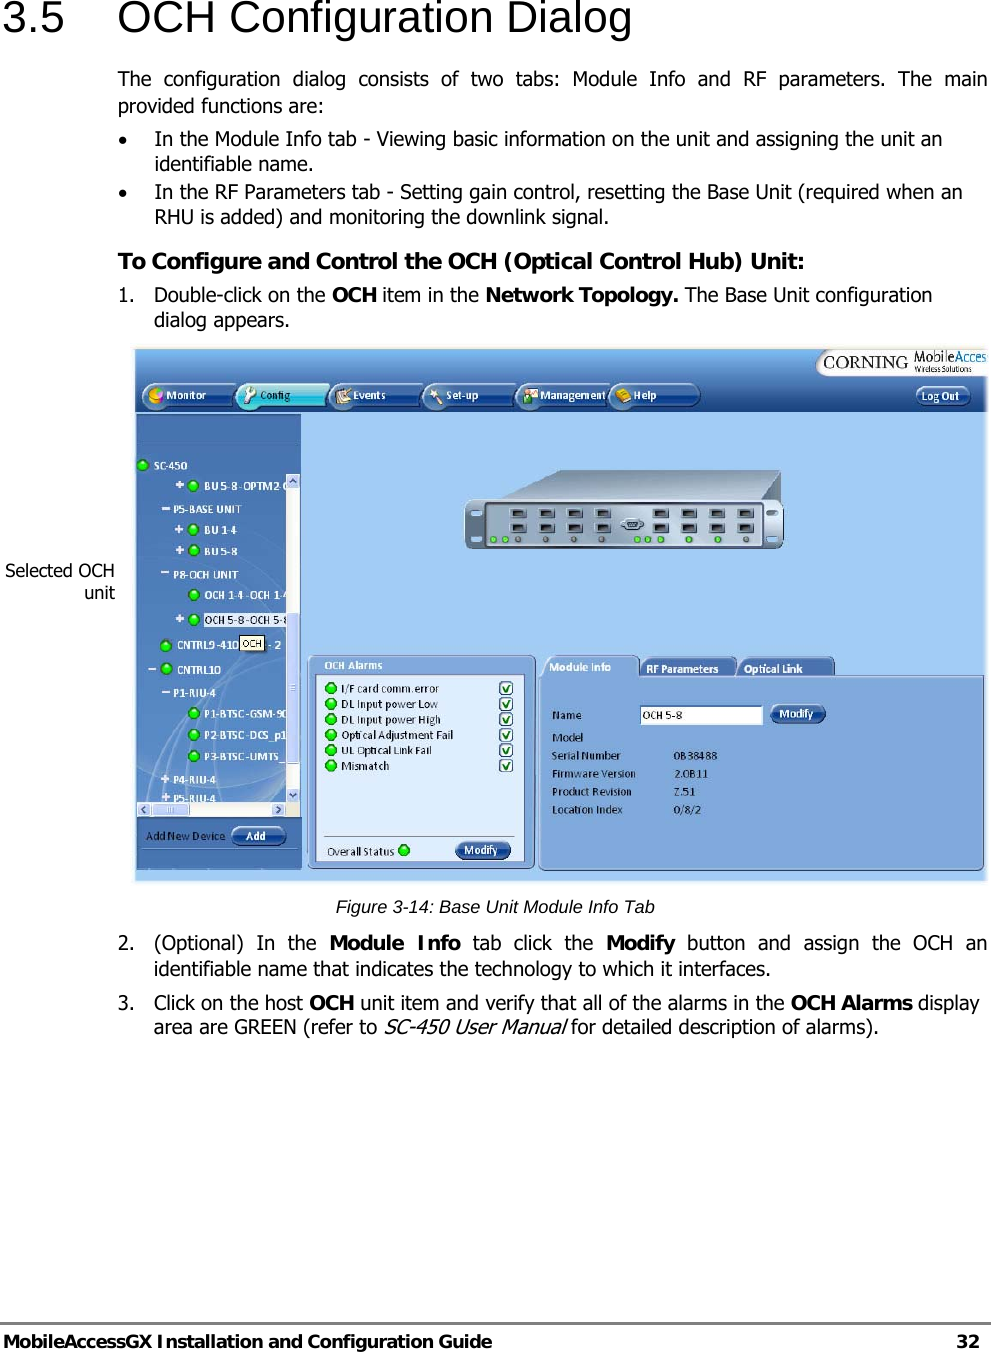   MobileAccessGX Installation and Configuration Guide   32  3.5  OCH Configuration Dialog The configuration dialog consists of two tabs: Module Info and RF parameters. The main provided functions are: • In the Module Info tab - Viewing basic information on the unit and assigning the unit an identifiable name. • In the RF Parameters tab - Setting gain control, resetting the Base Unit (required when an RHU is added) and monitoring the downlink signal. To Configure and Control the OCH (Optical Control Hub) Unit: 1.  Double-click on the OCH item in the Network Topology. The Base Unit configuration dialog appears.  Figure 3-14: Base Unit Module Info Tab 2.  (Optional) In the Module Info tab click the Modify button and assign the OCH an identifiable name that indicates the technology to which it interfaces. 3.  Click on the host OCH unit item and verify that all of the alarms in the OCH Alarms display area are GREEN (refer to SC-450 User Manual for detailed description of alarms). Selected OCH unit